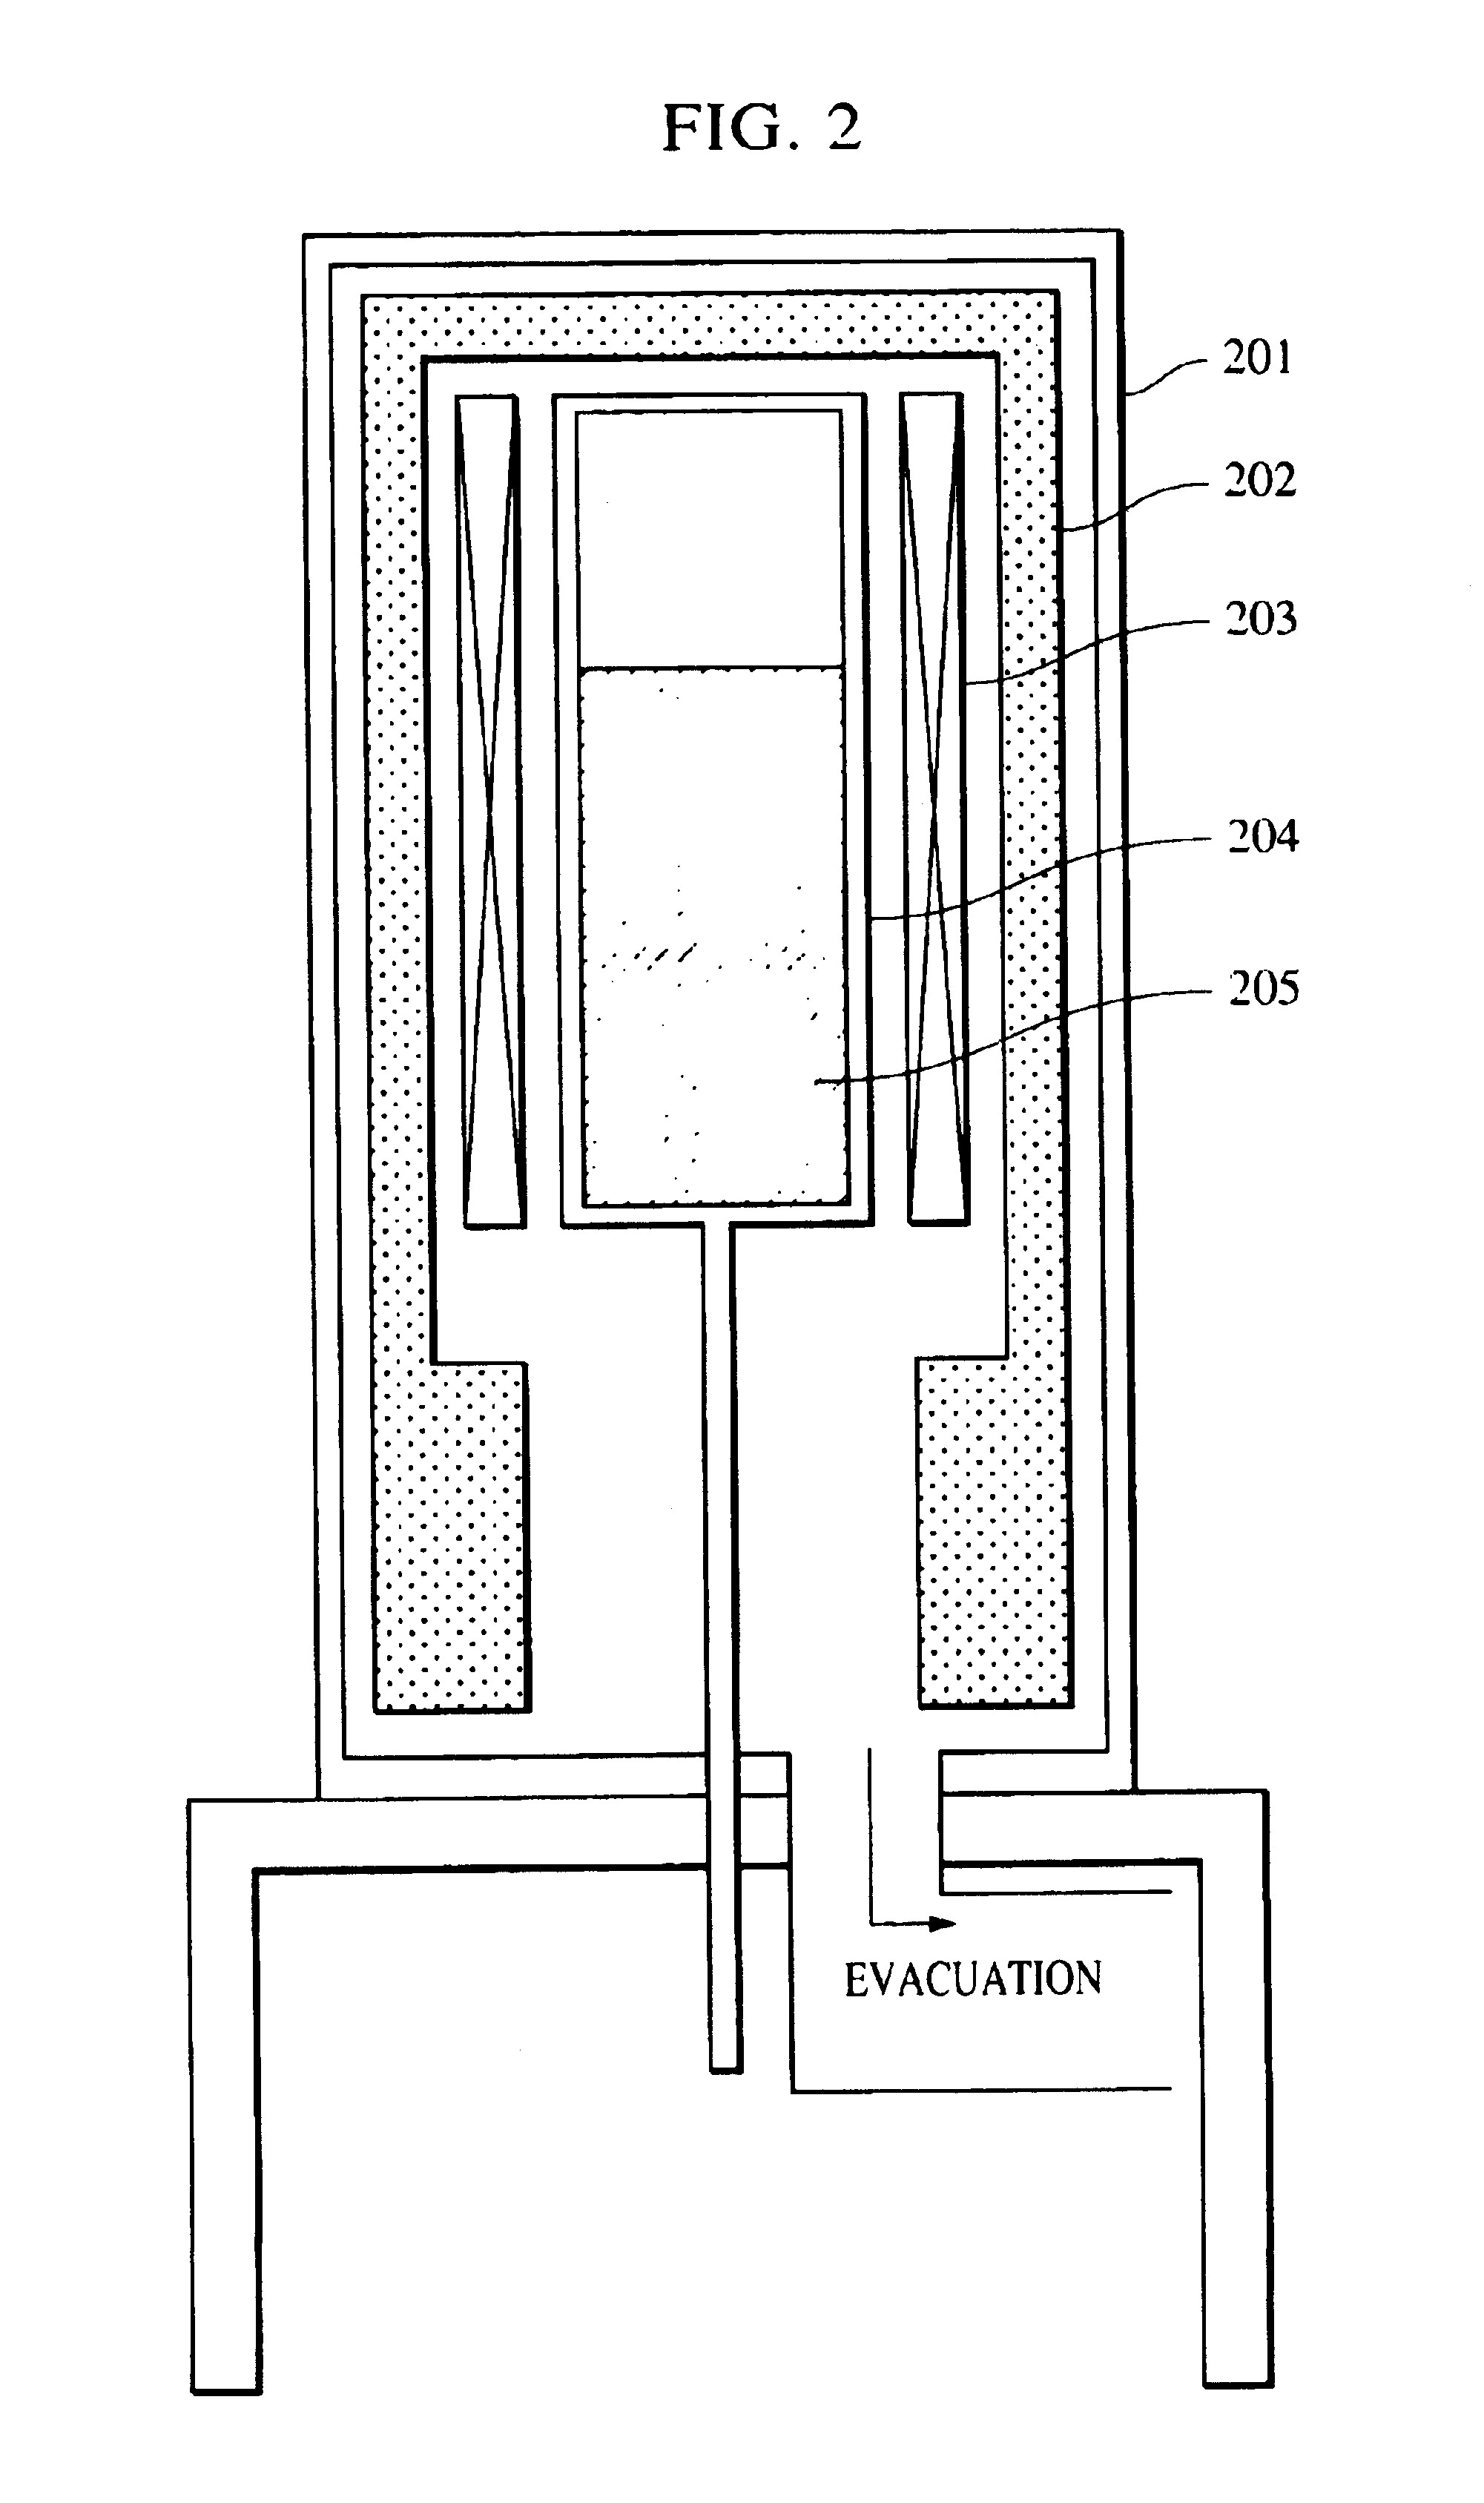 Methods of making fluoride crystal and fluoride crystal lens